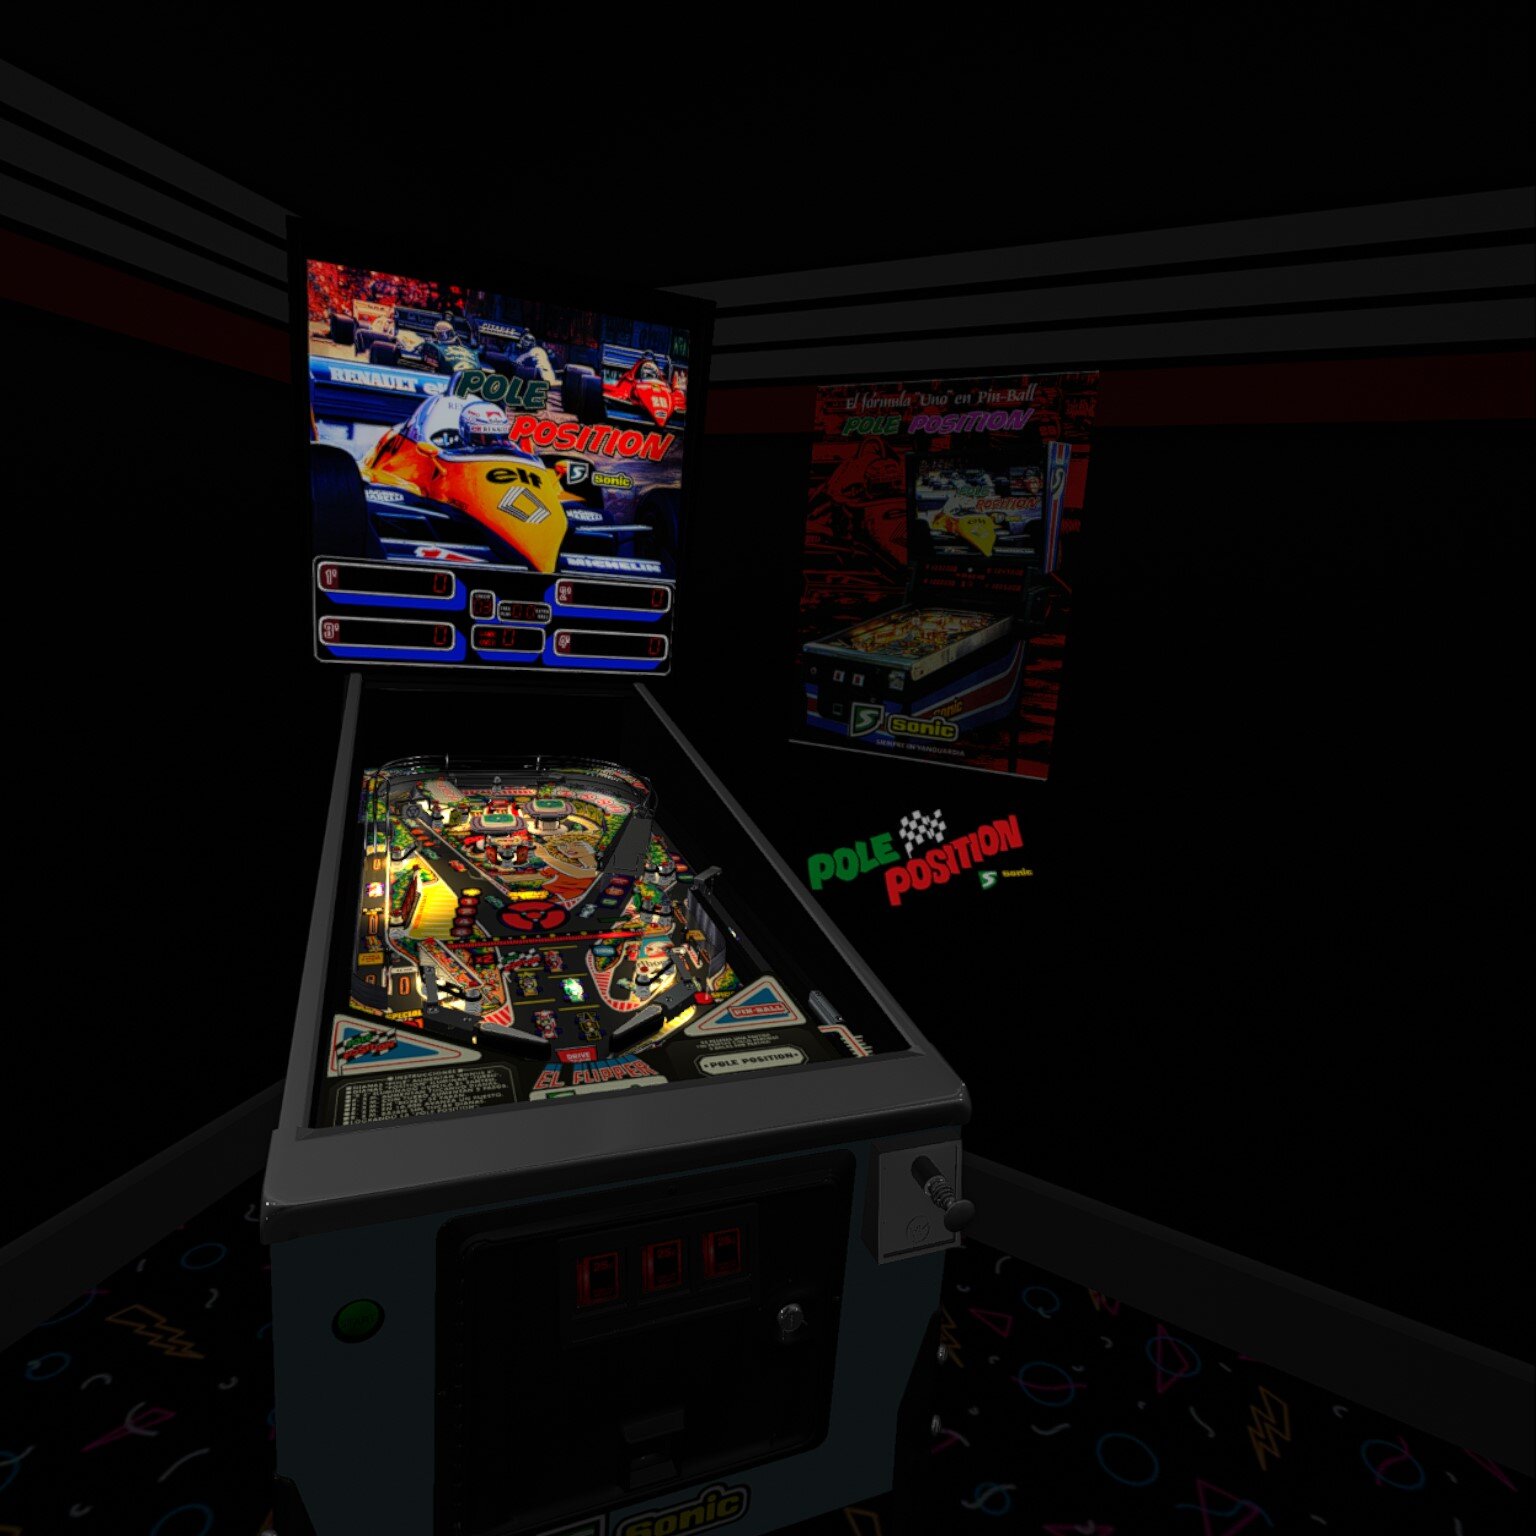 Pole Position (Sonic 1987) 2.0_VR ROOM